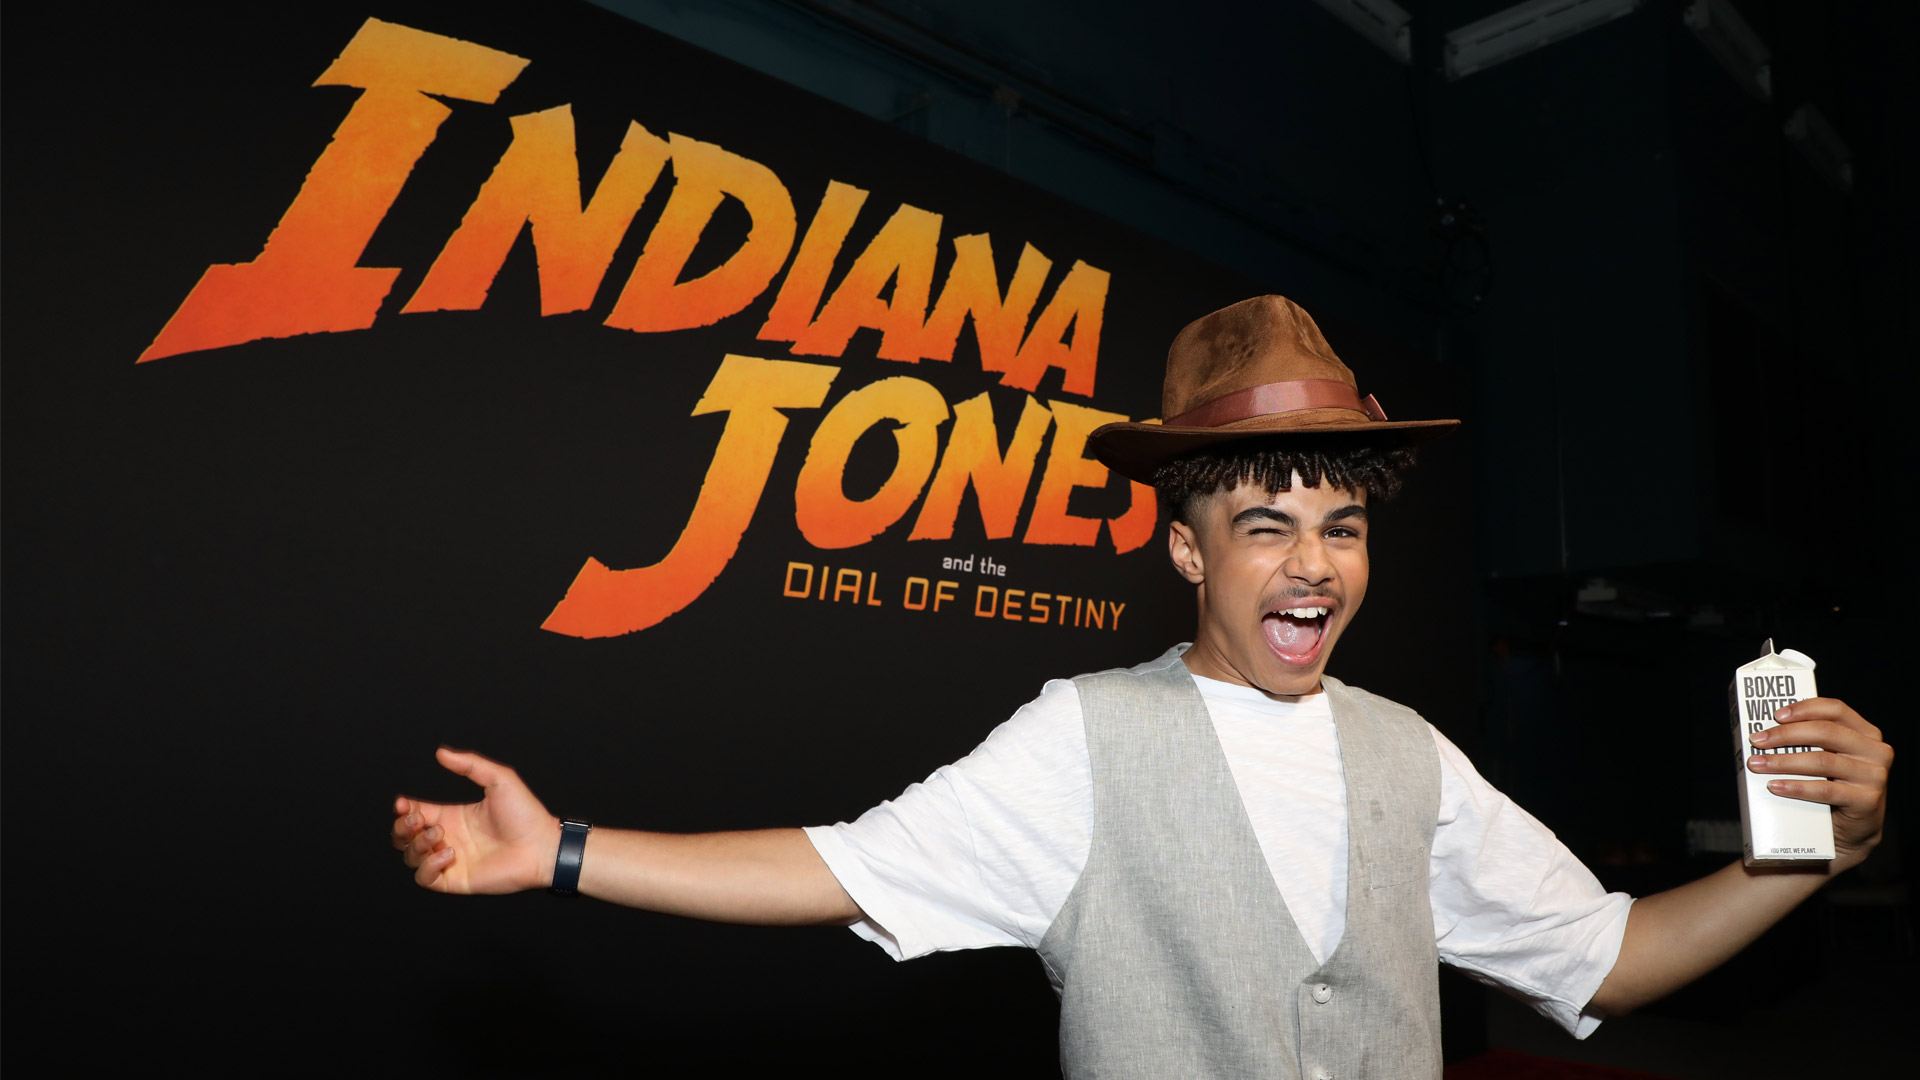 Ethann Isidore with an Indy hat at the U.S. premiere red carpet